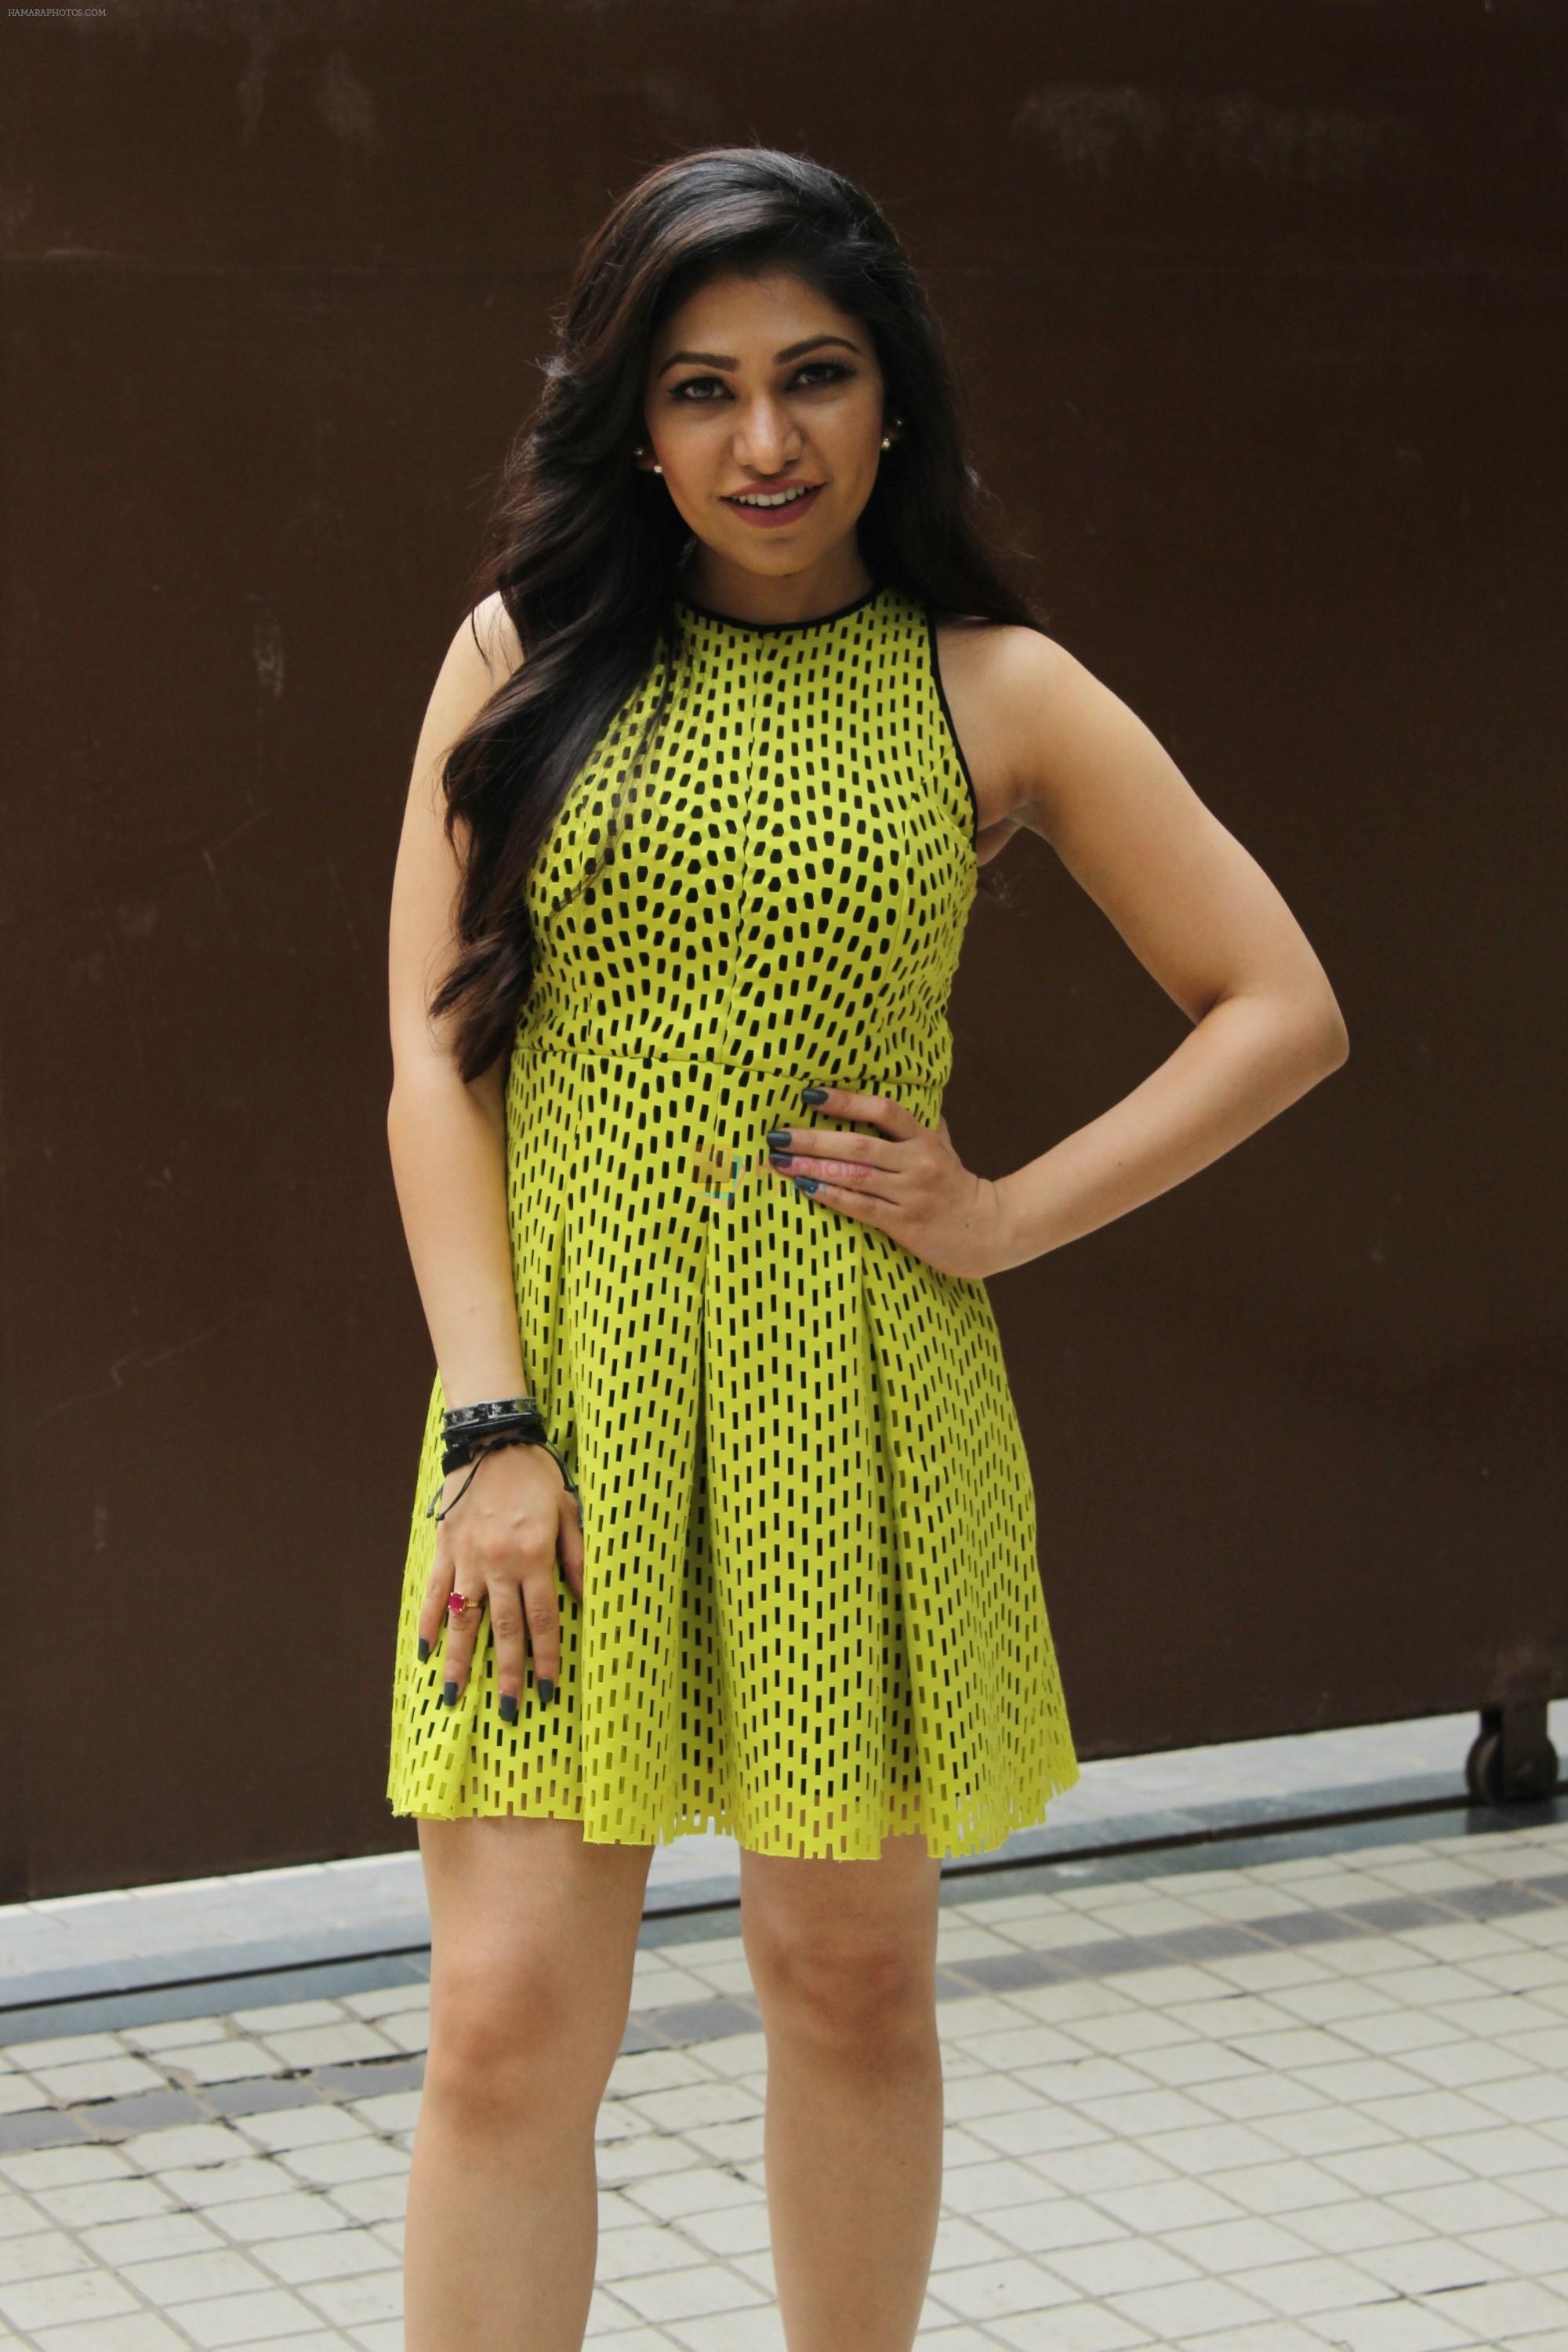 Tulsi Kumar Spotted Of T Series Office For Promote Film Batla House on 18th July 2019